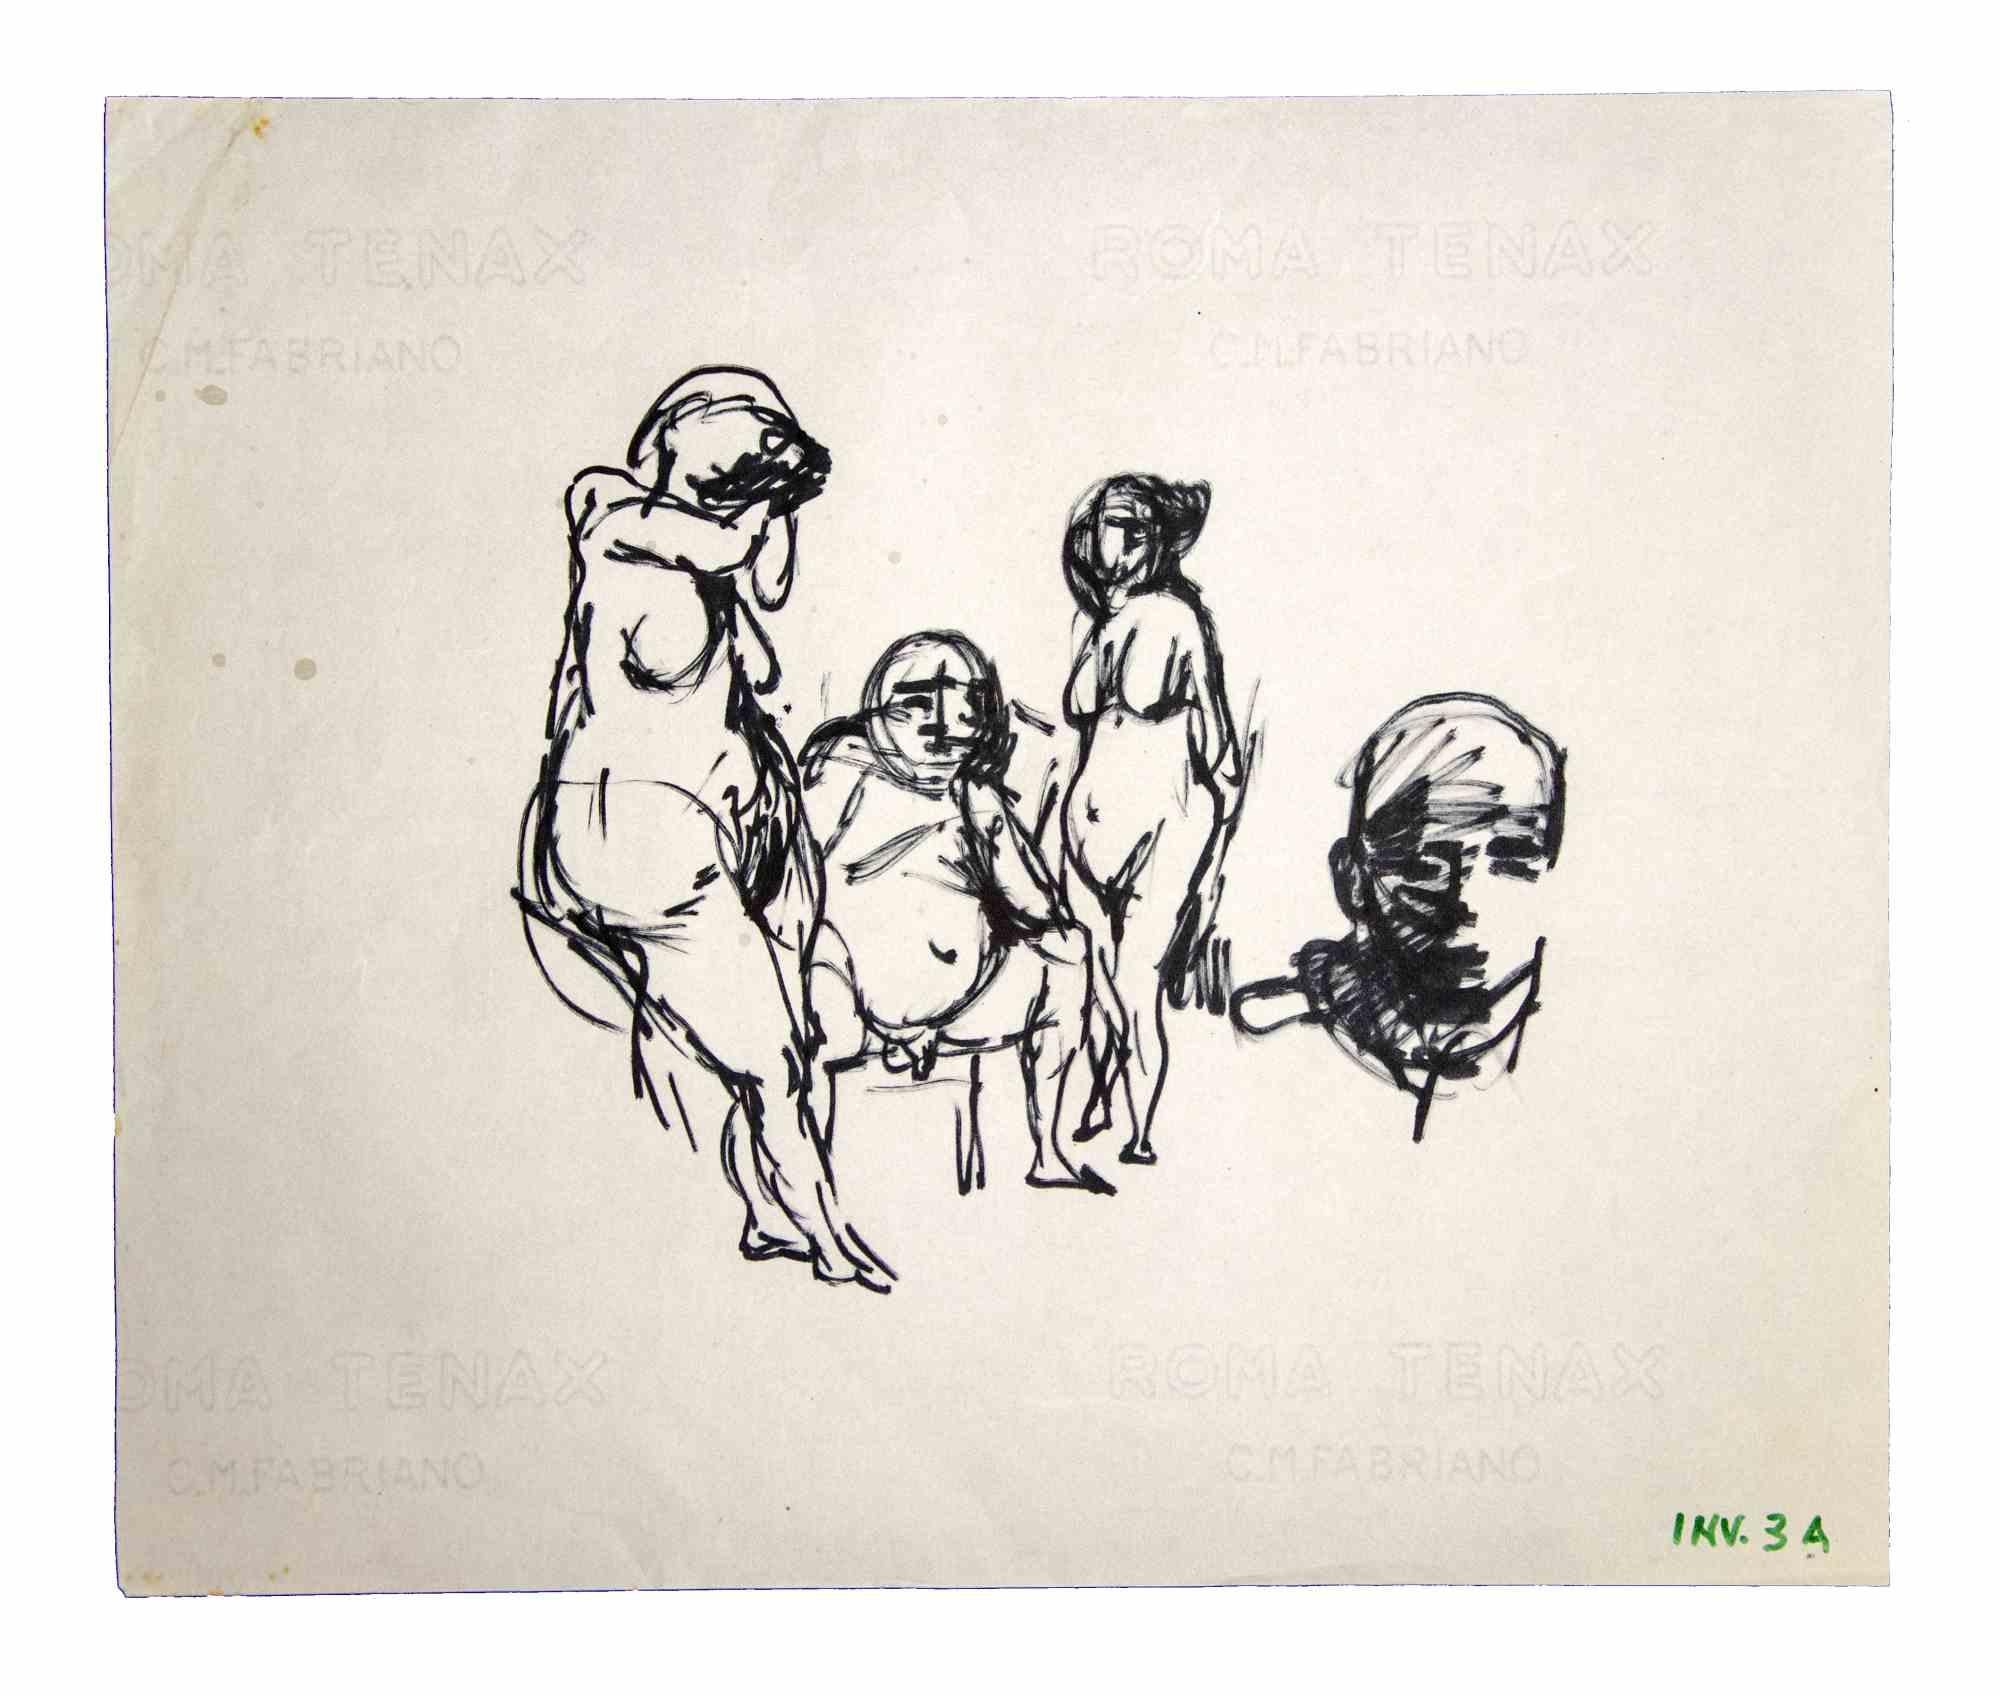 Posing Figures Sketch is an original Contemporary artwork realized in the 1970s. by the Italian Contemporary artist  Leo Guida  (1992 - 2017).

Original drawing in black marker on ivory-colored paper.

Good conditions with slight foxing and fold at